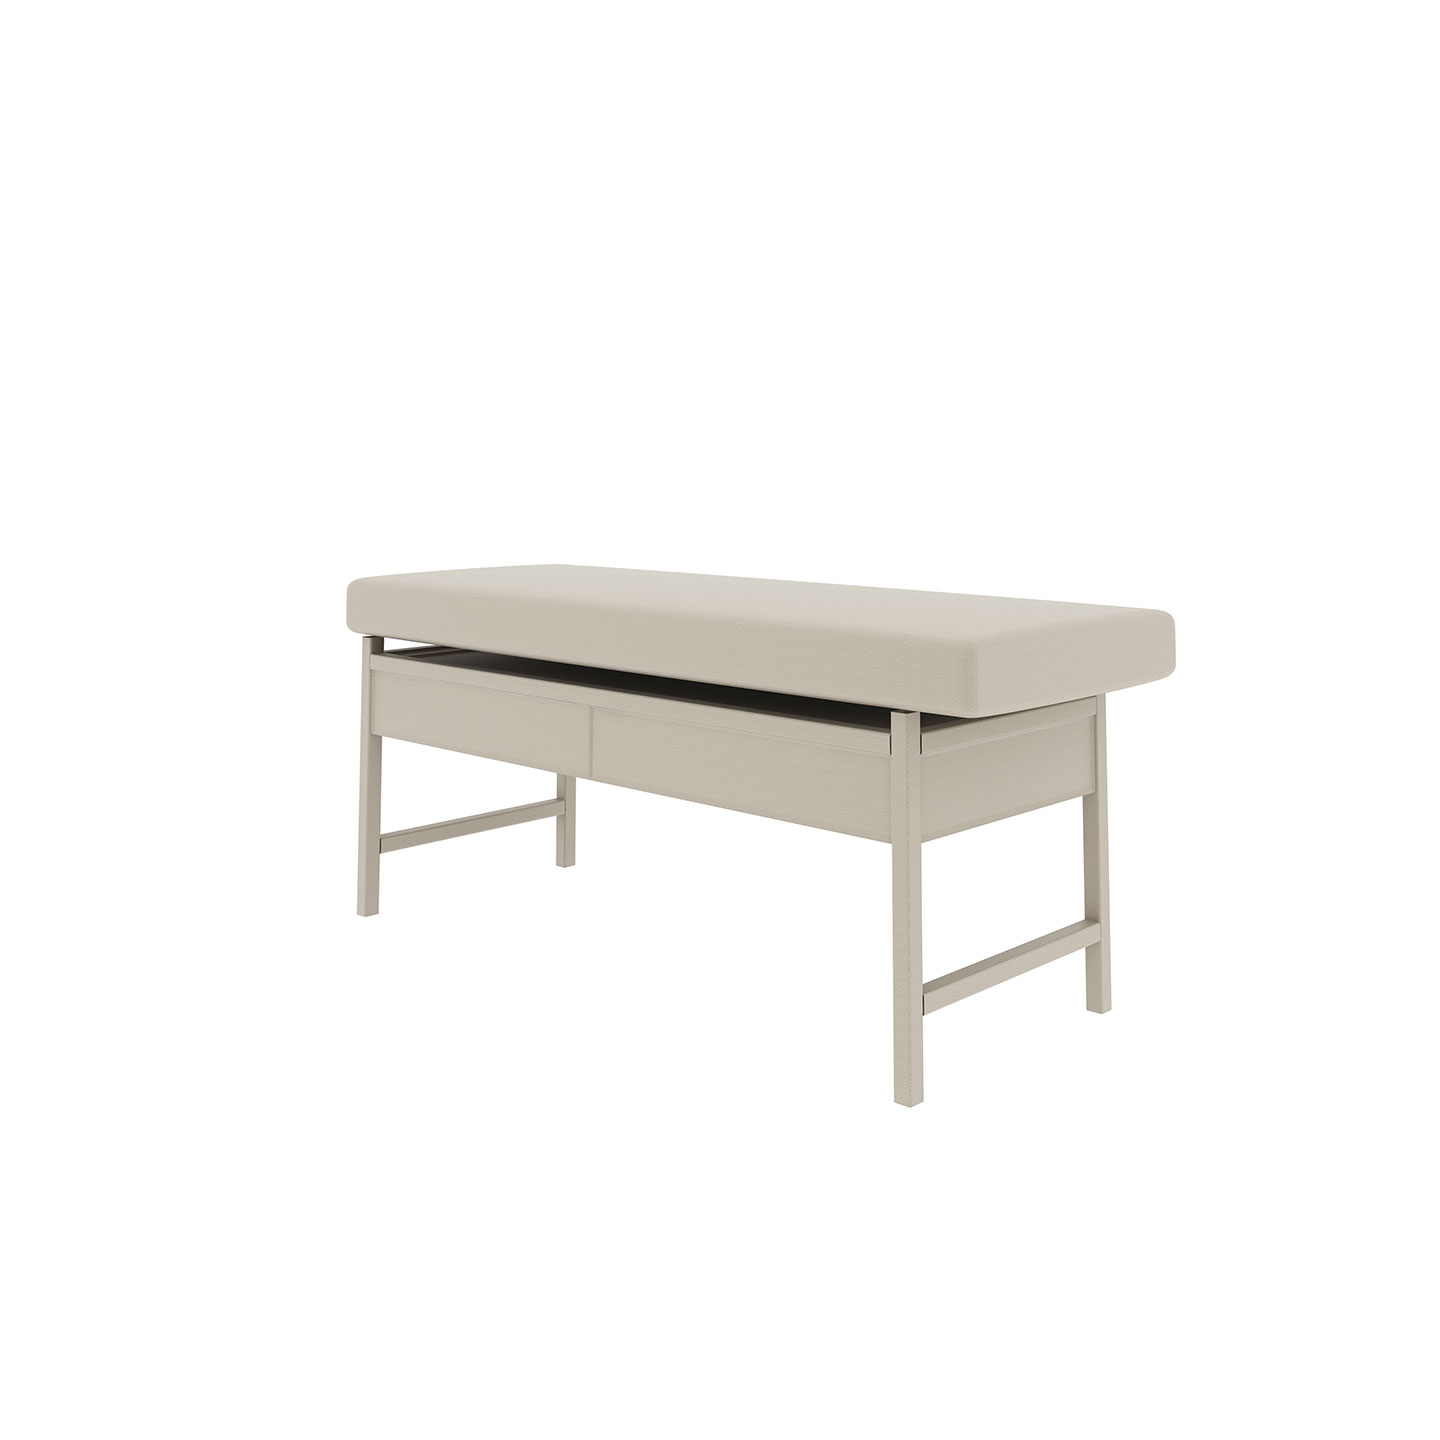 Haworth Manual exam table with 4 legs and vinyl upholstery